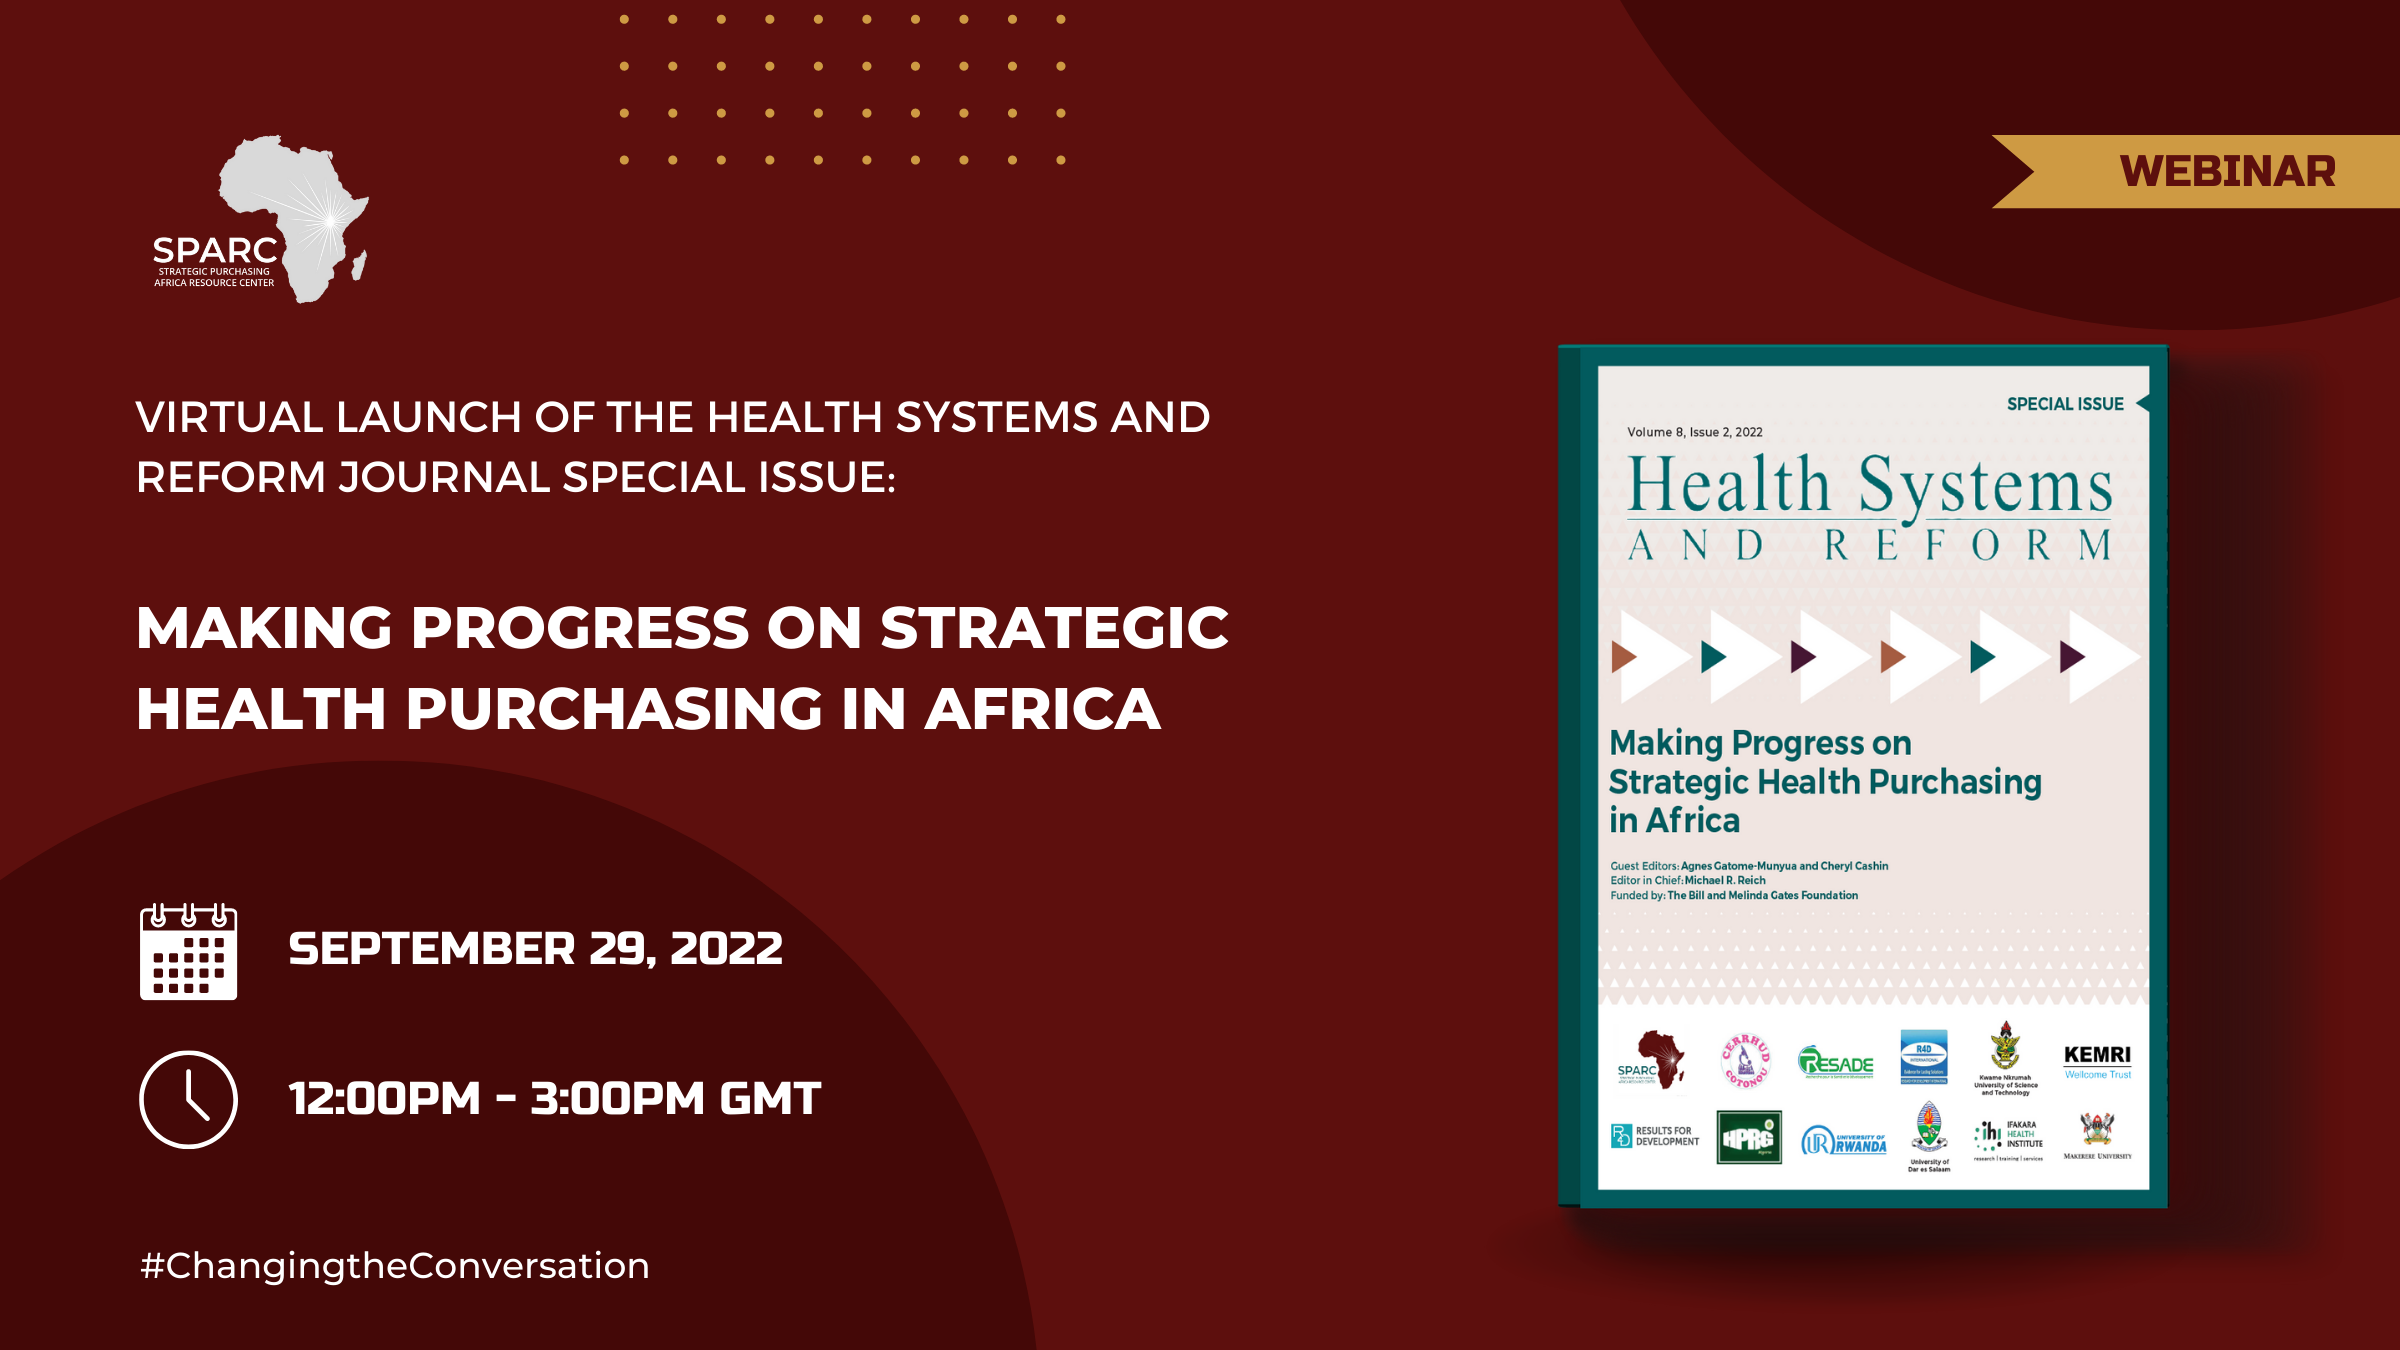 Virtual Launch of the Health Systems and Reform Journal Special Issue: Making Progress on Strategic Health Purchasing in Africa